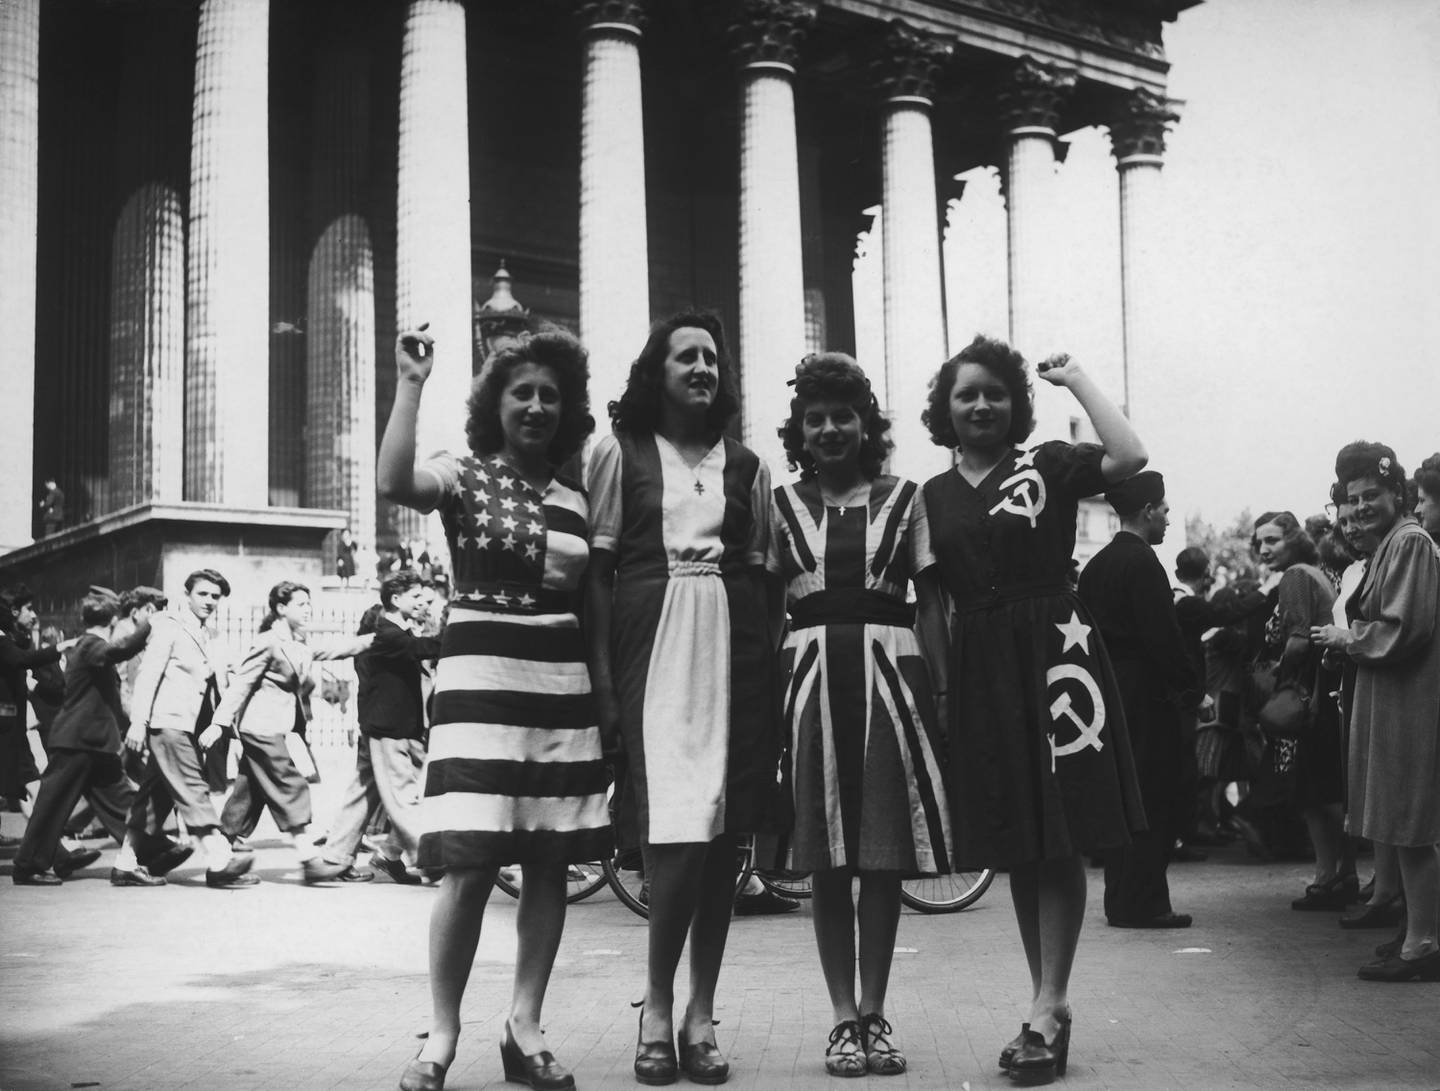 A group of women wearing dresses representing flags of the Allied powers (from left to right: the U.S., France, Britain and the Soviet Union) outside the Eglise de la Madeleine on V-E Day in Paris, May 8, 1945.